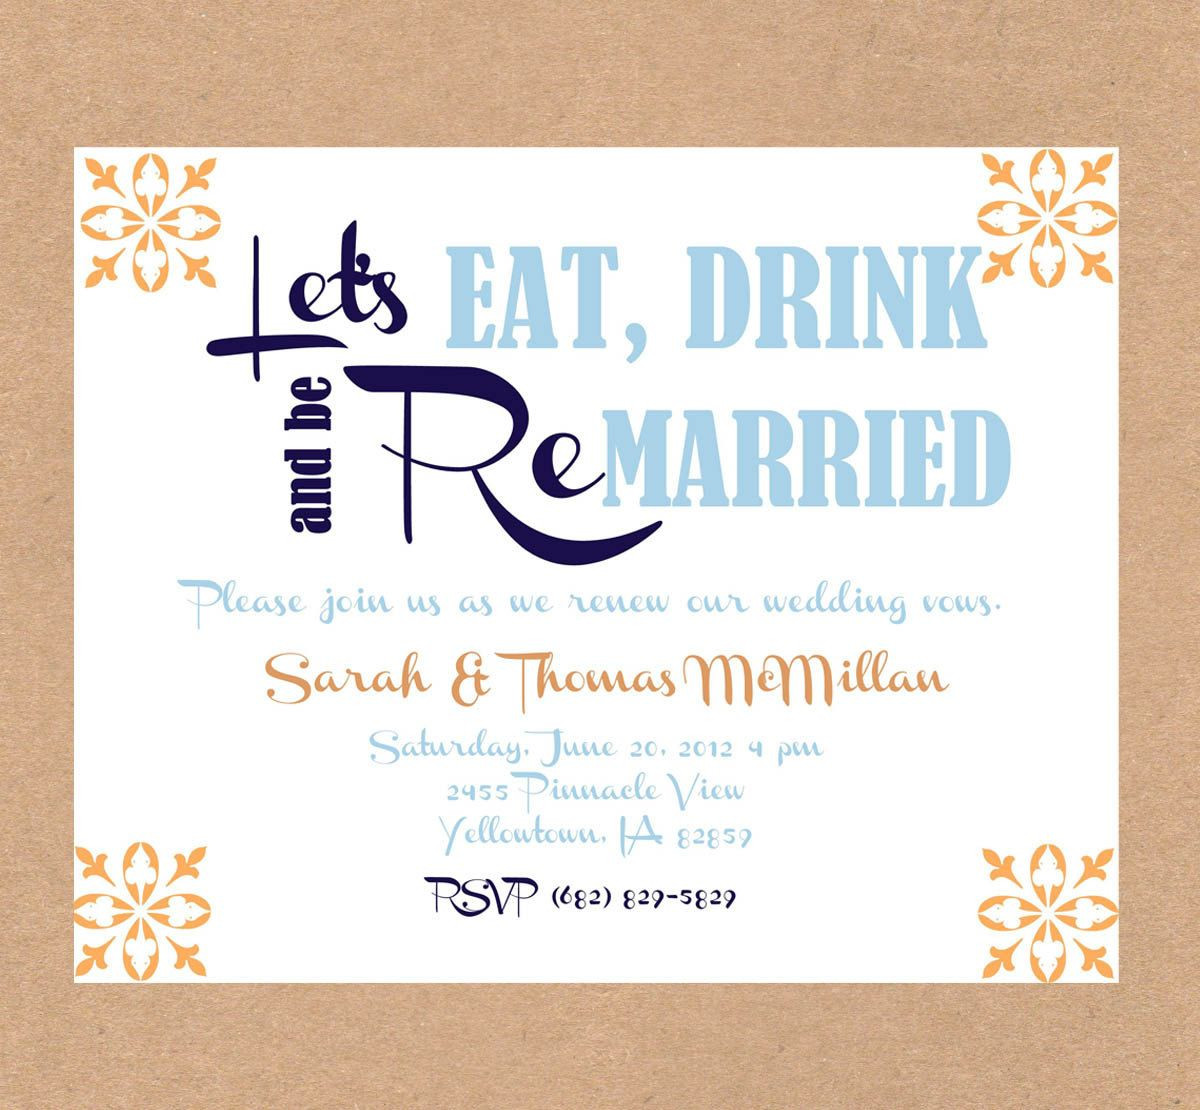 Wedding Vow Renewal Invitation Wording
 Vow renewal invitation eat drink and be married